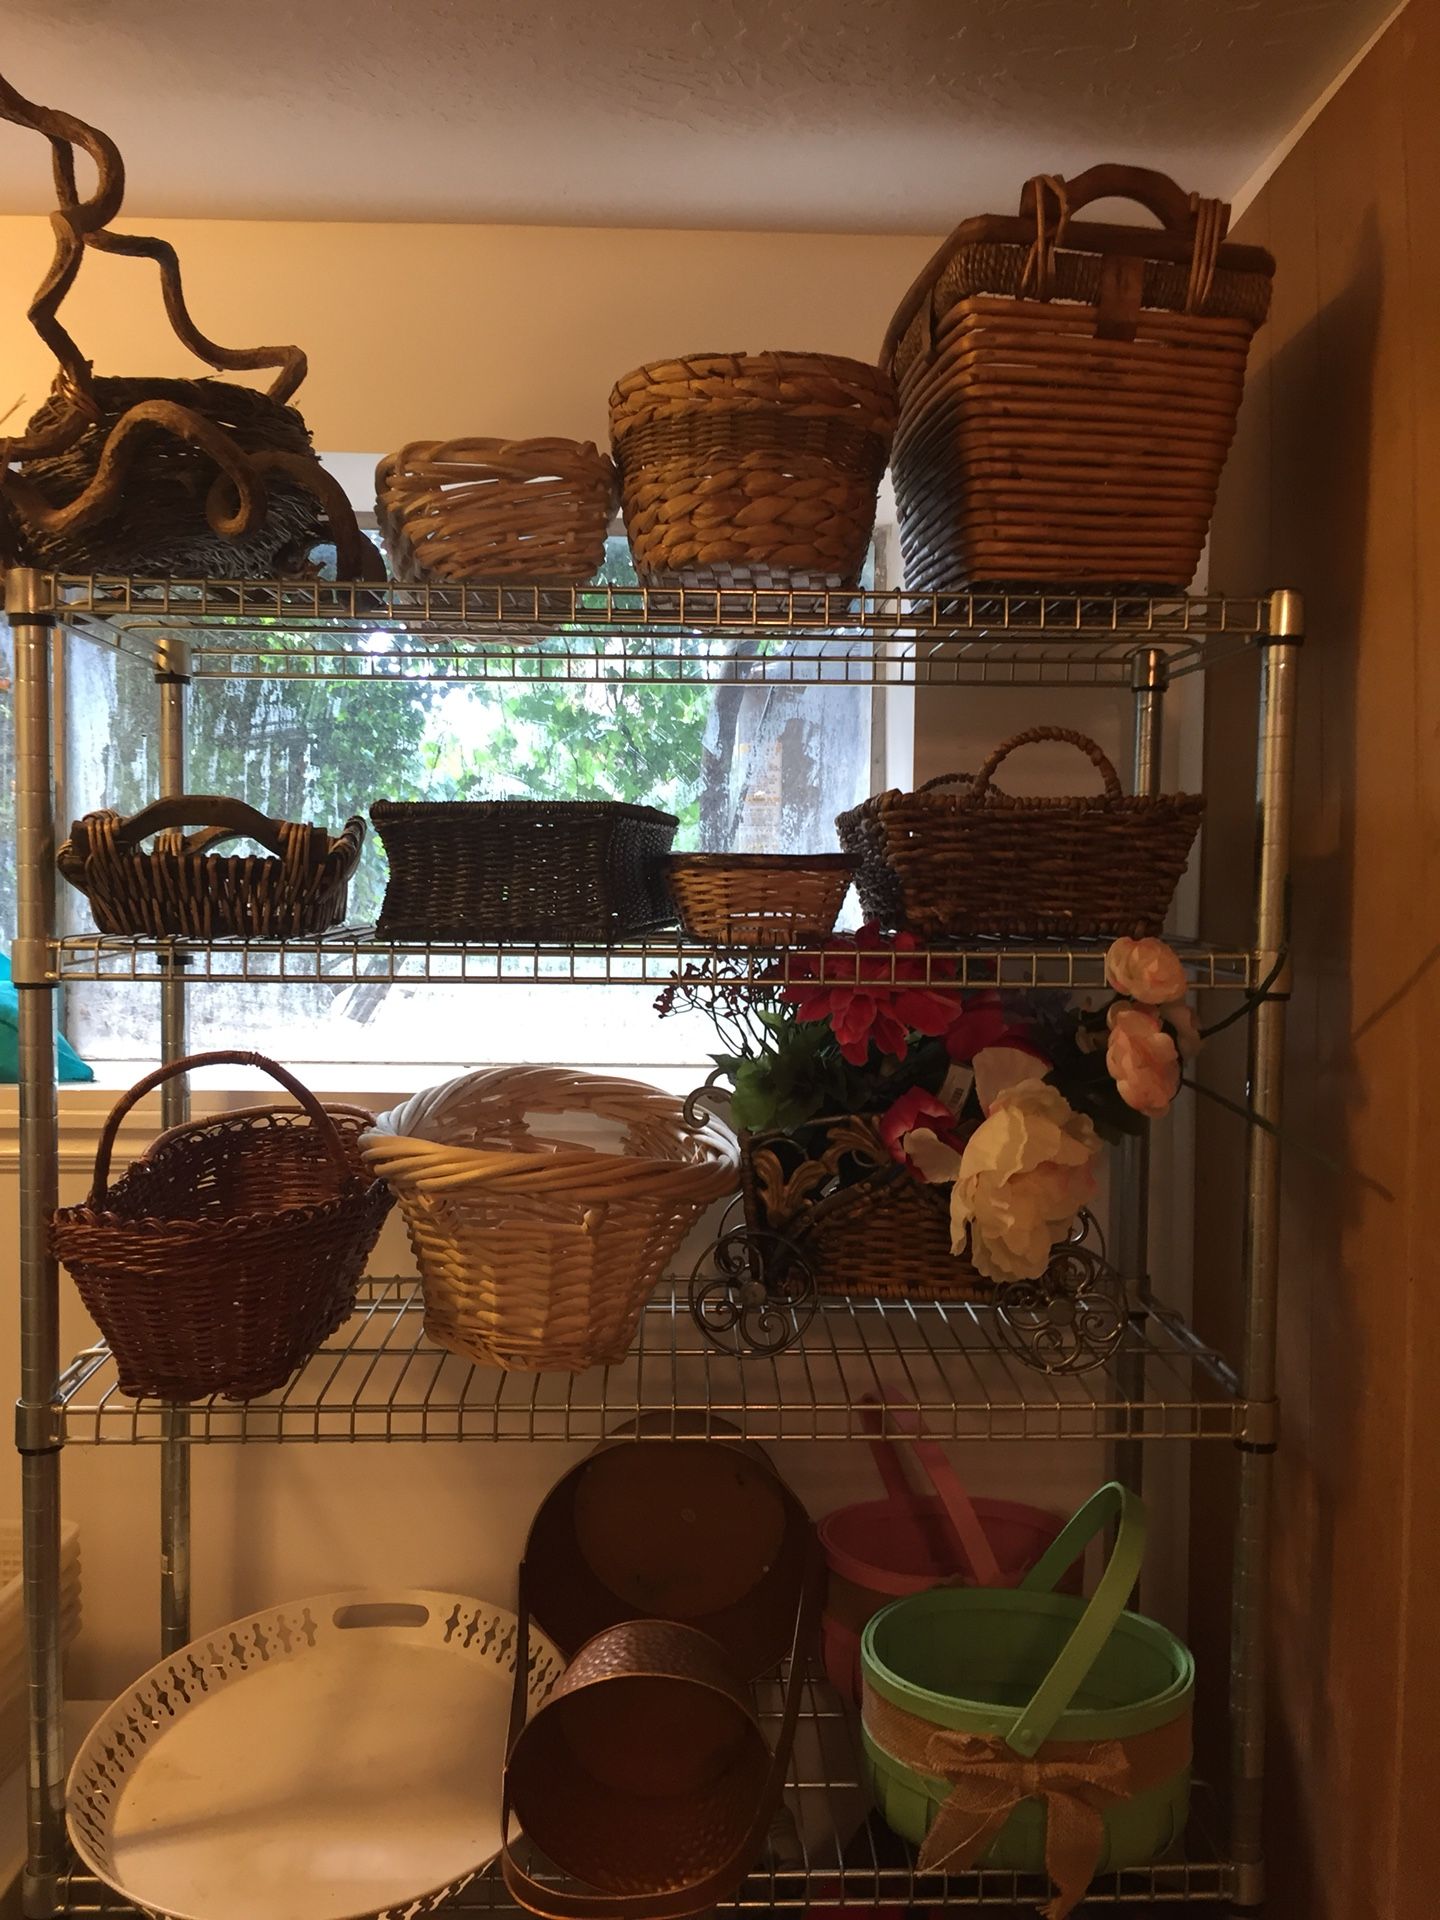 Various storage and decorative baskets and trays